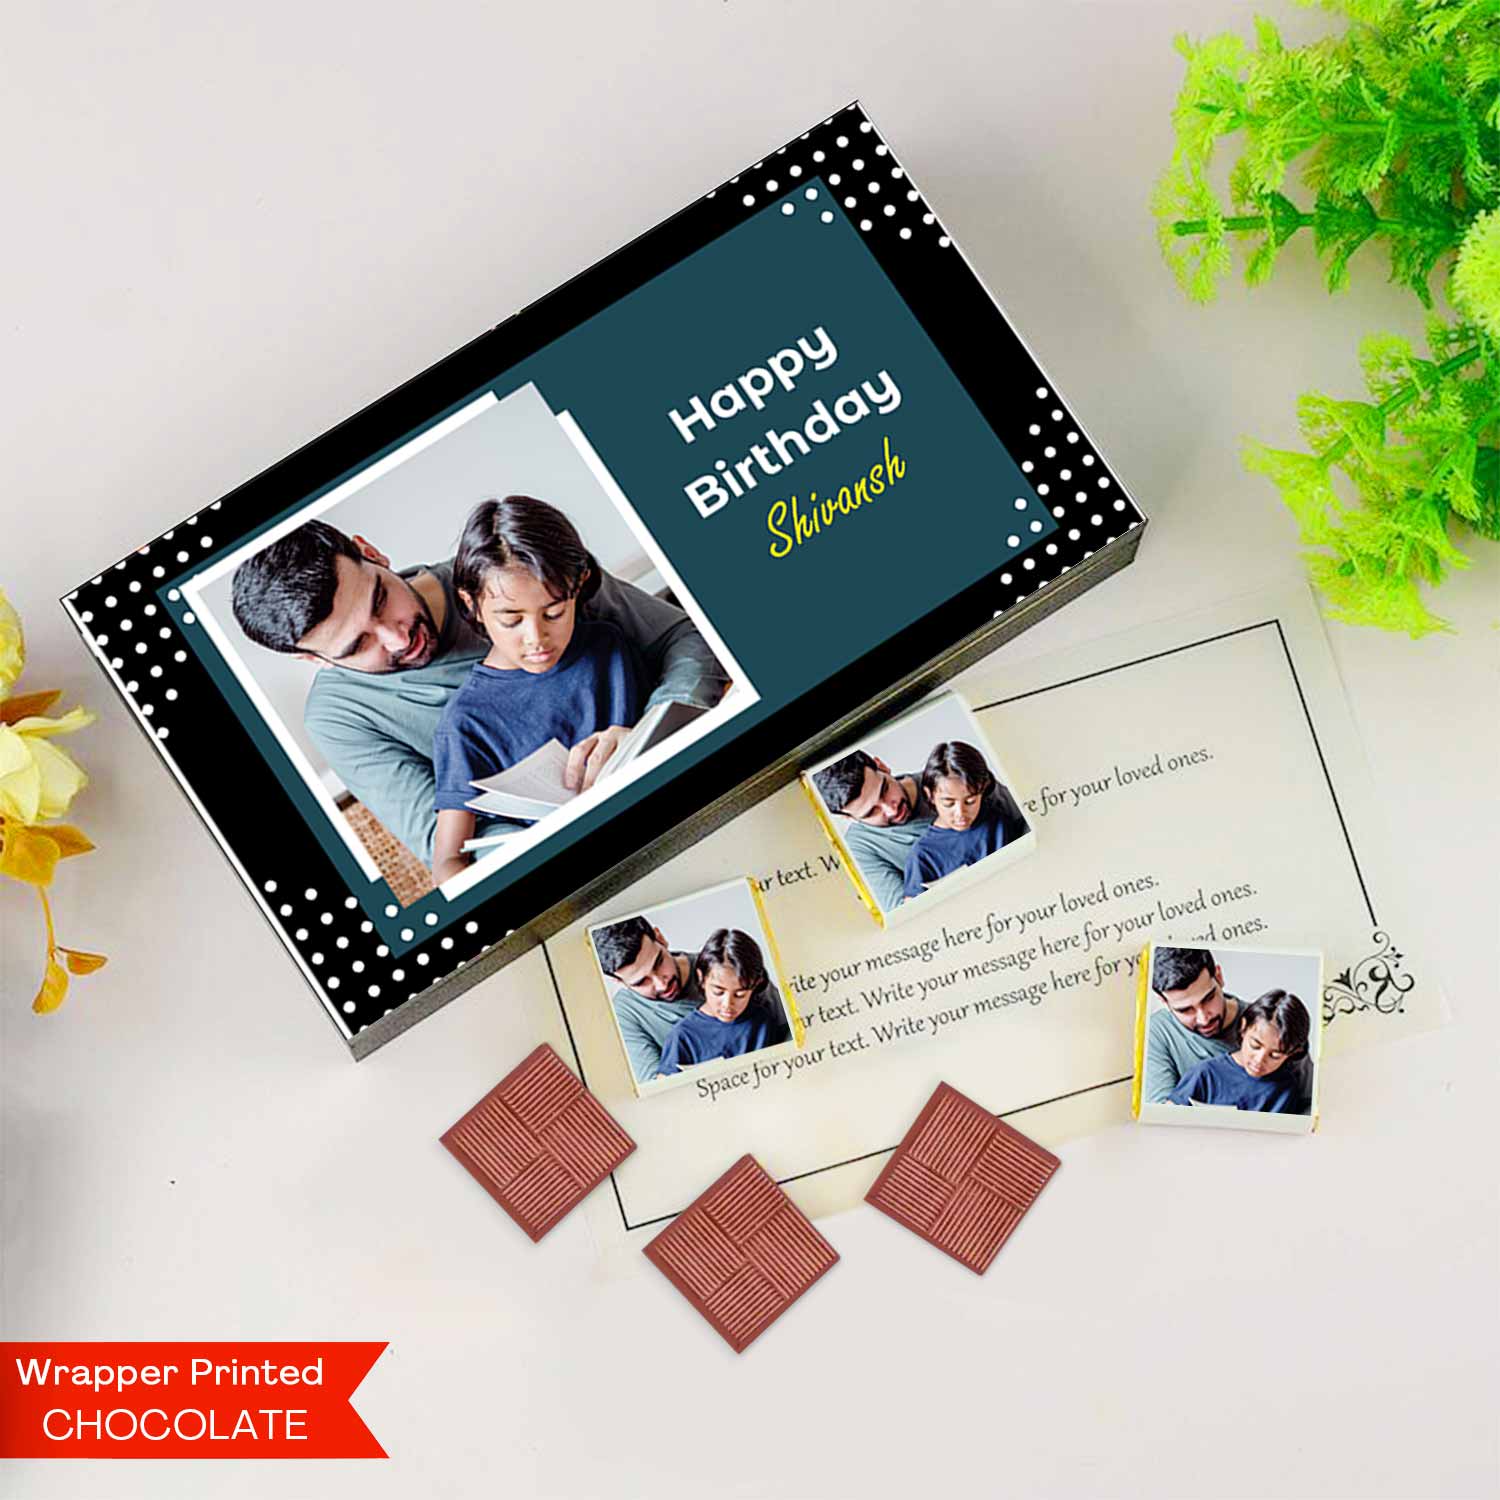  personalised chocolates with names personalised chocolates with photo personalised chocolates with photo india personalised chocolates for birthdays photo on chocolate wrappers customised chocolate gifts personalised chocolate gift box photo chocolate box